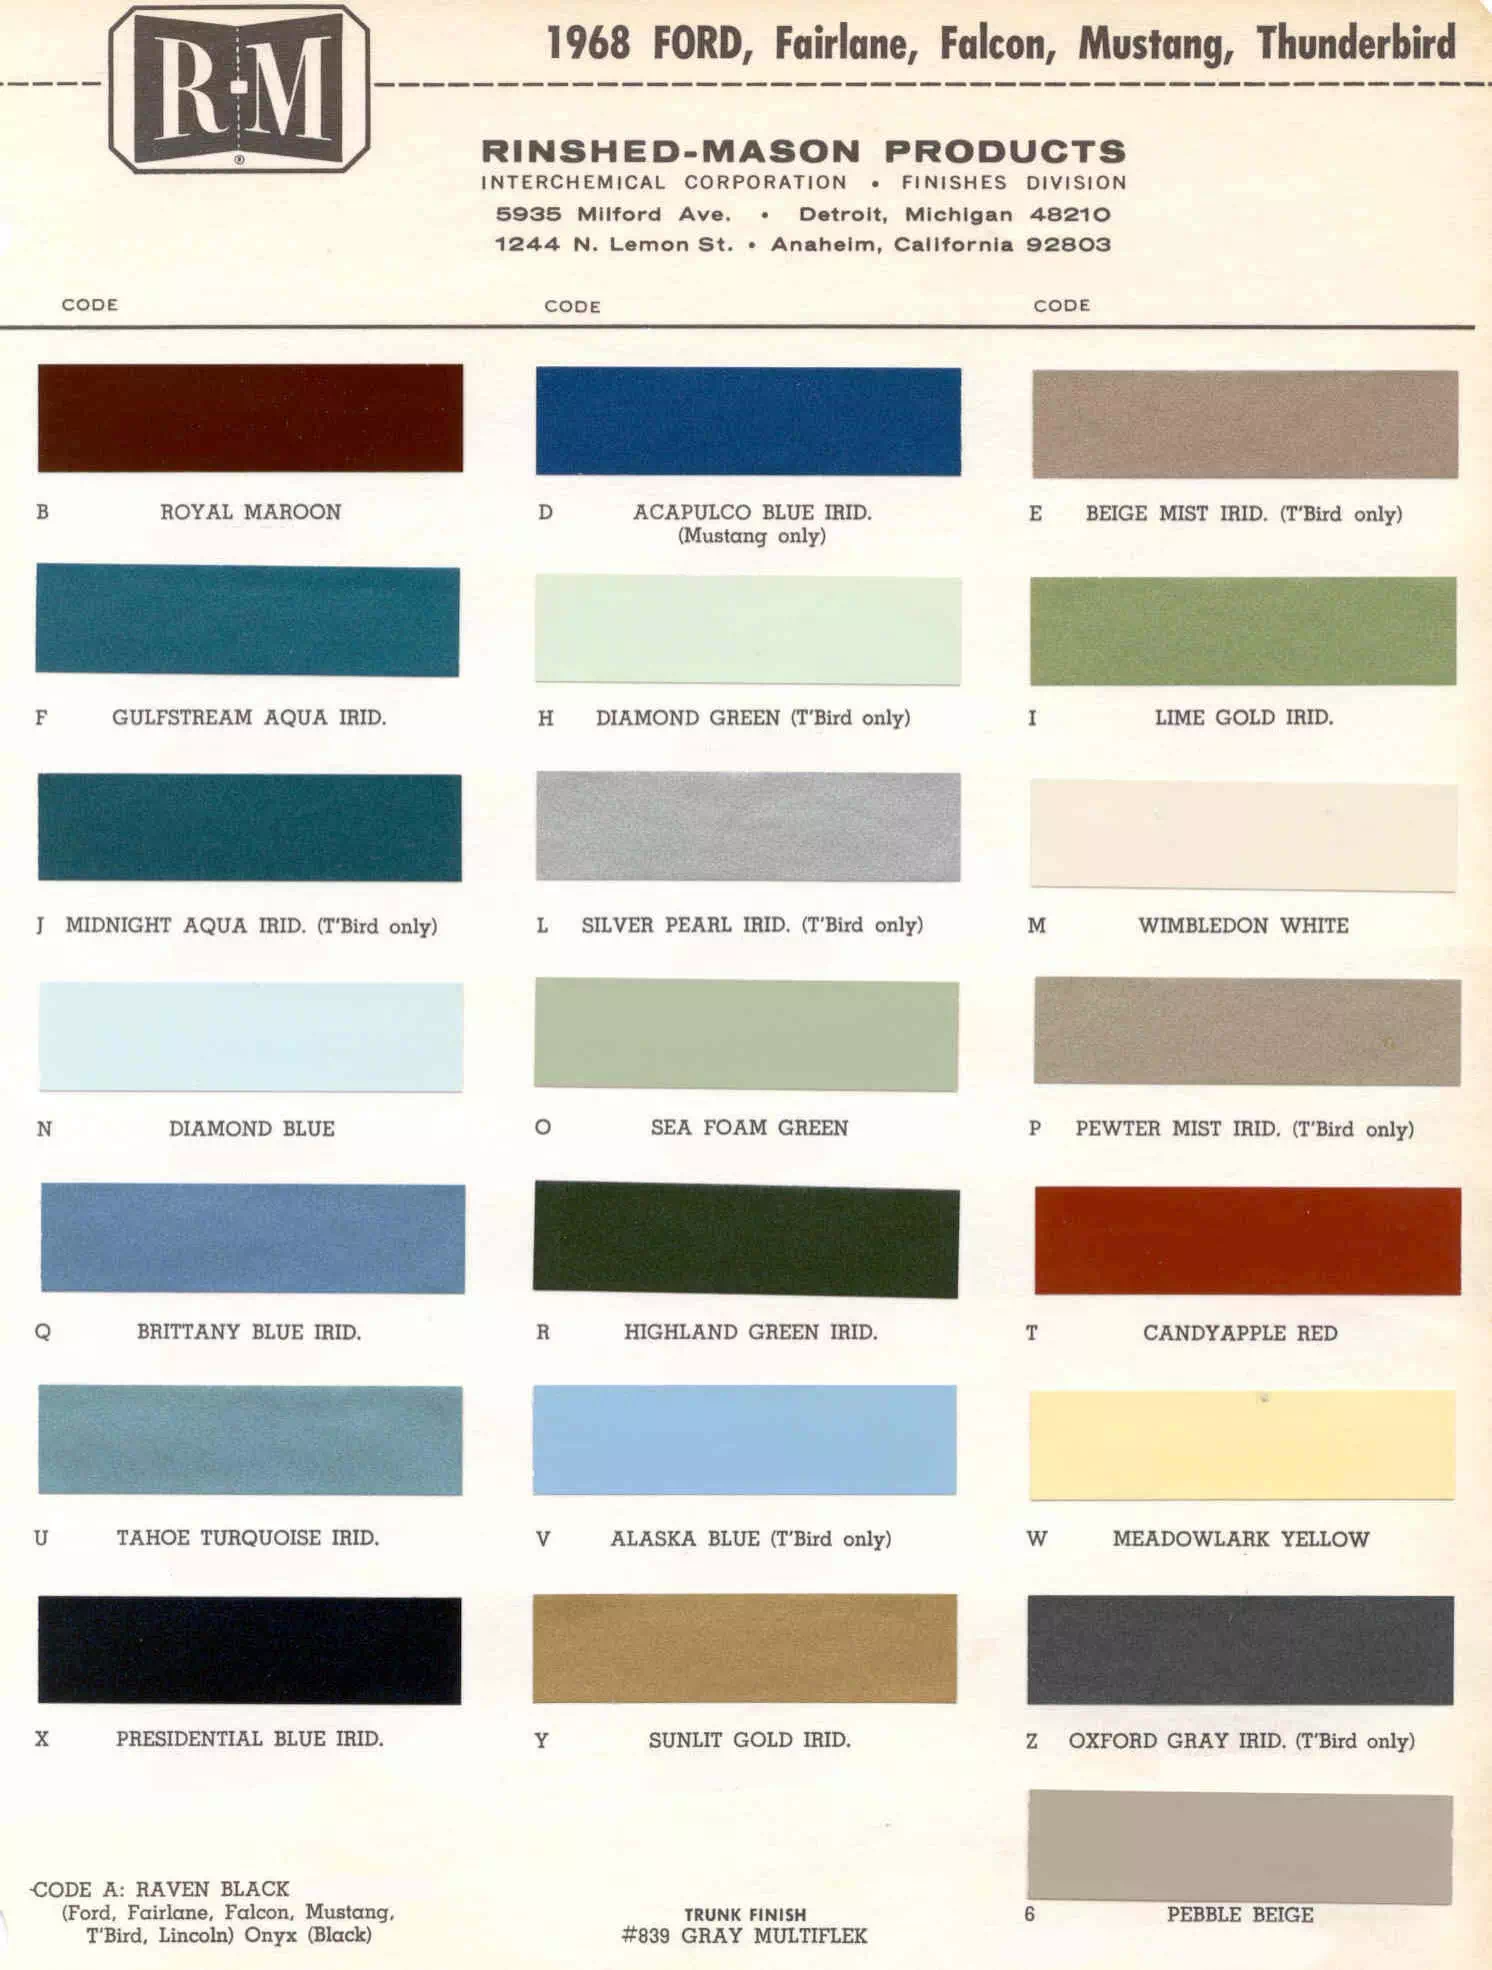 Color examples, Ordering Codes, OEM Paint Code, Color Swatches, and Color Names for the Ford Motor Company in 1968